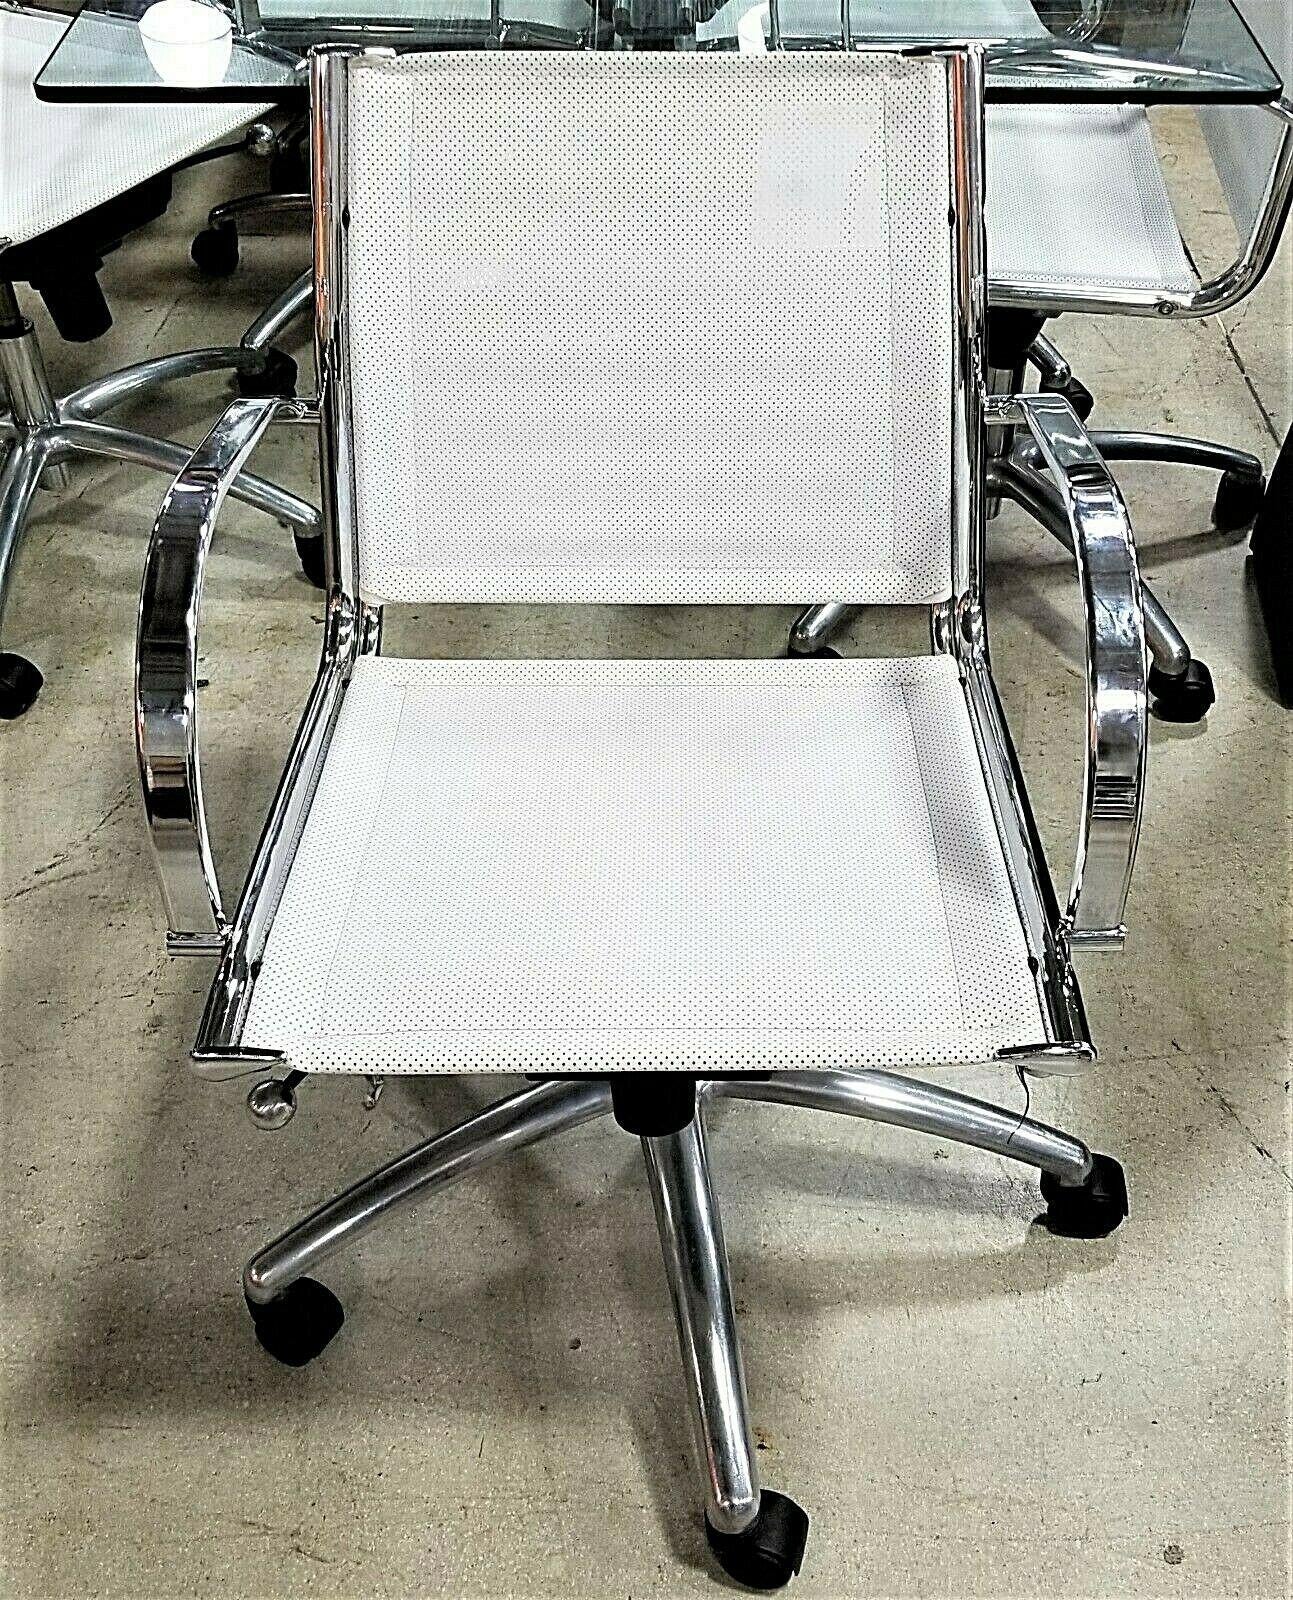 Offering one of our recent palm beach office estate fine furniture acquisitions of a 
Set of 6 Mid-Century Modern chrome adjustable armchairs by Sitland
Made in Italy

Measures: Adjustable seat height: Maximum is 22